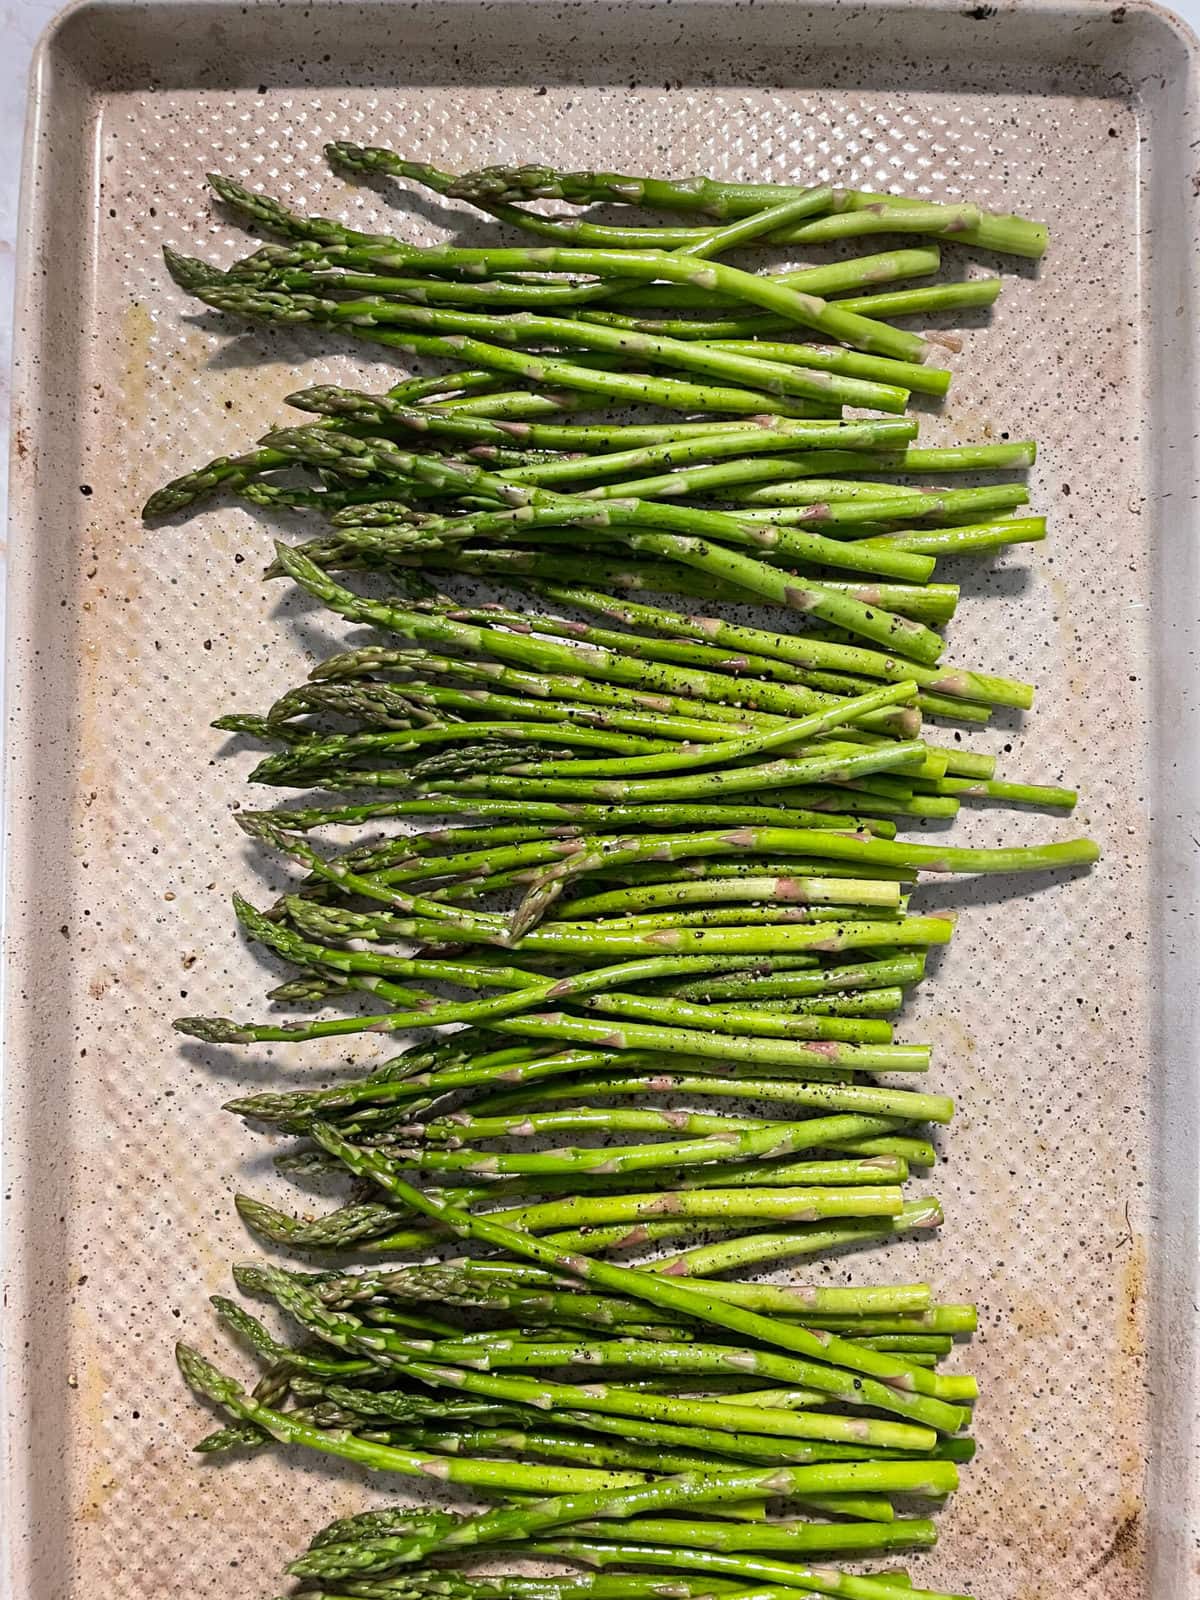 asparagus on sheet pan with salt and pepper